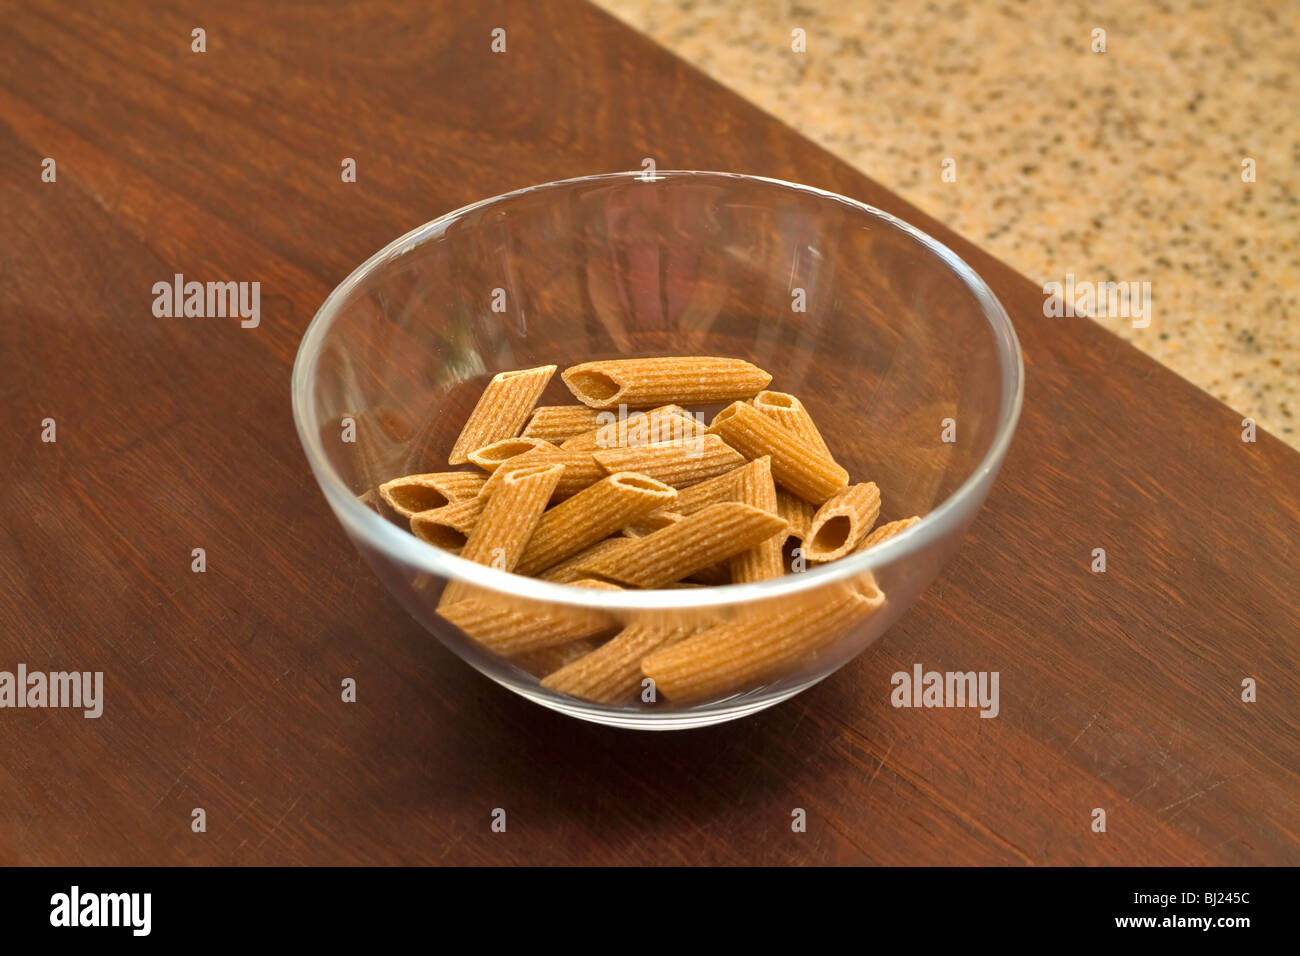 Uncooked wholemeal penne rigata pasta Stock Photo